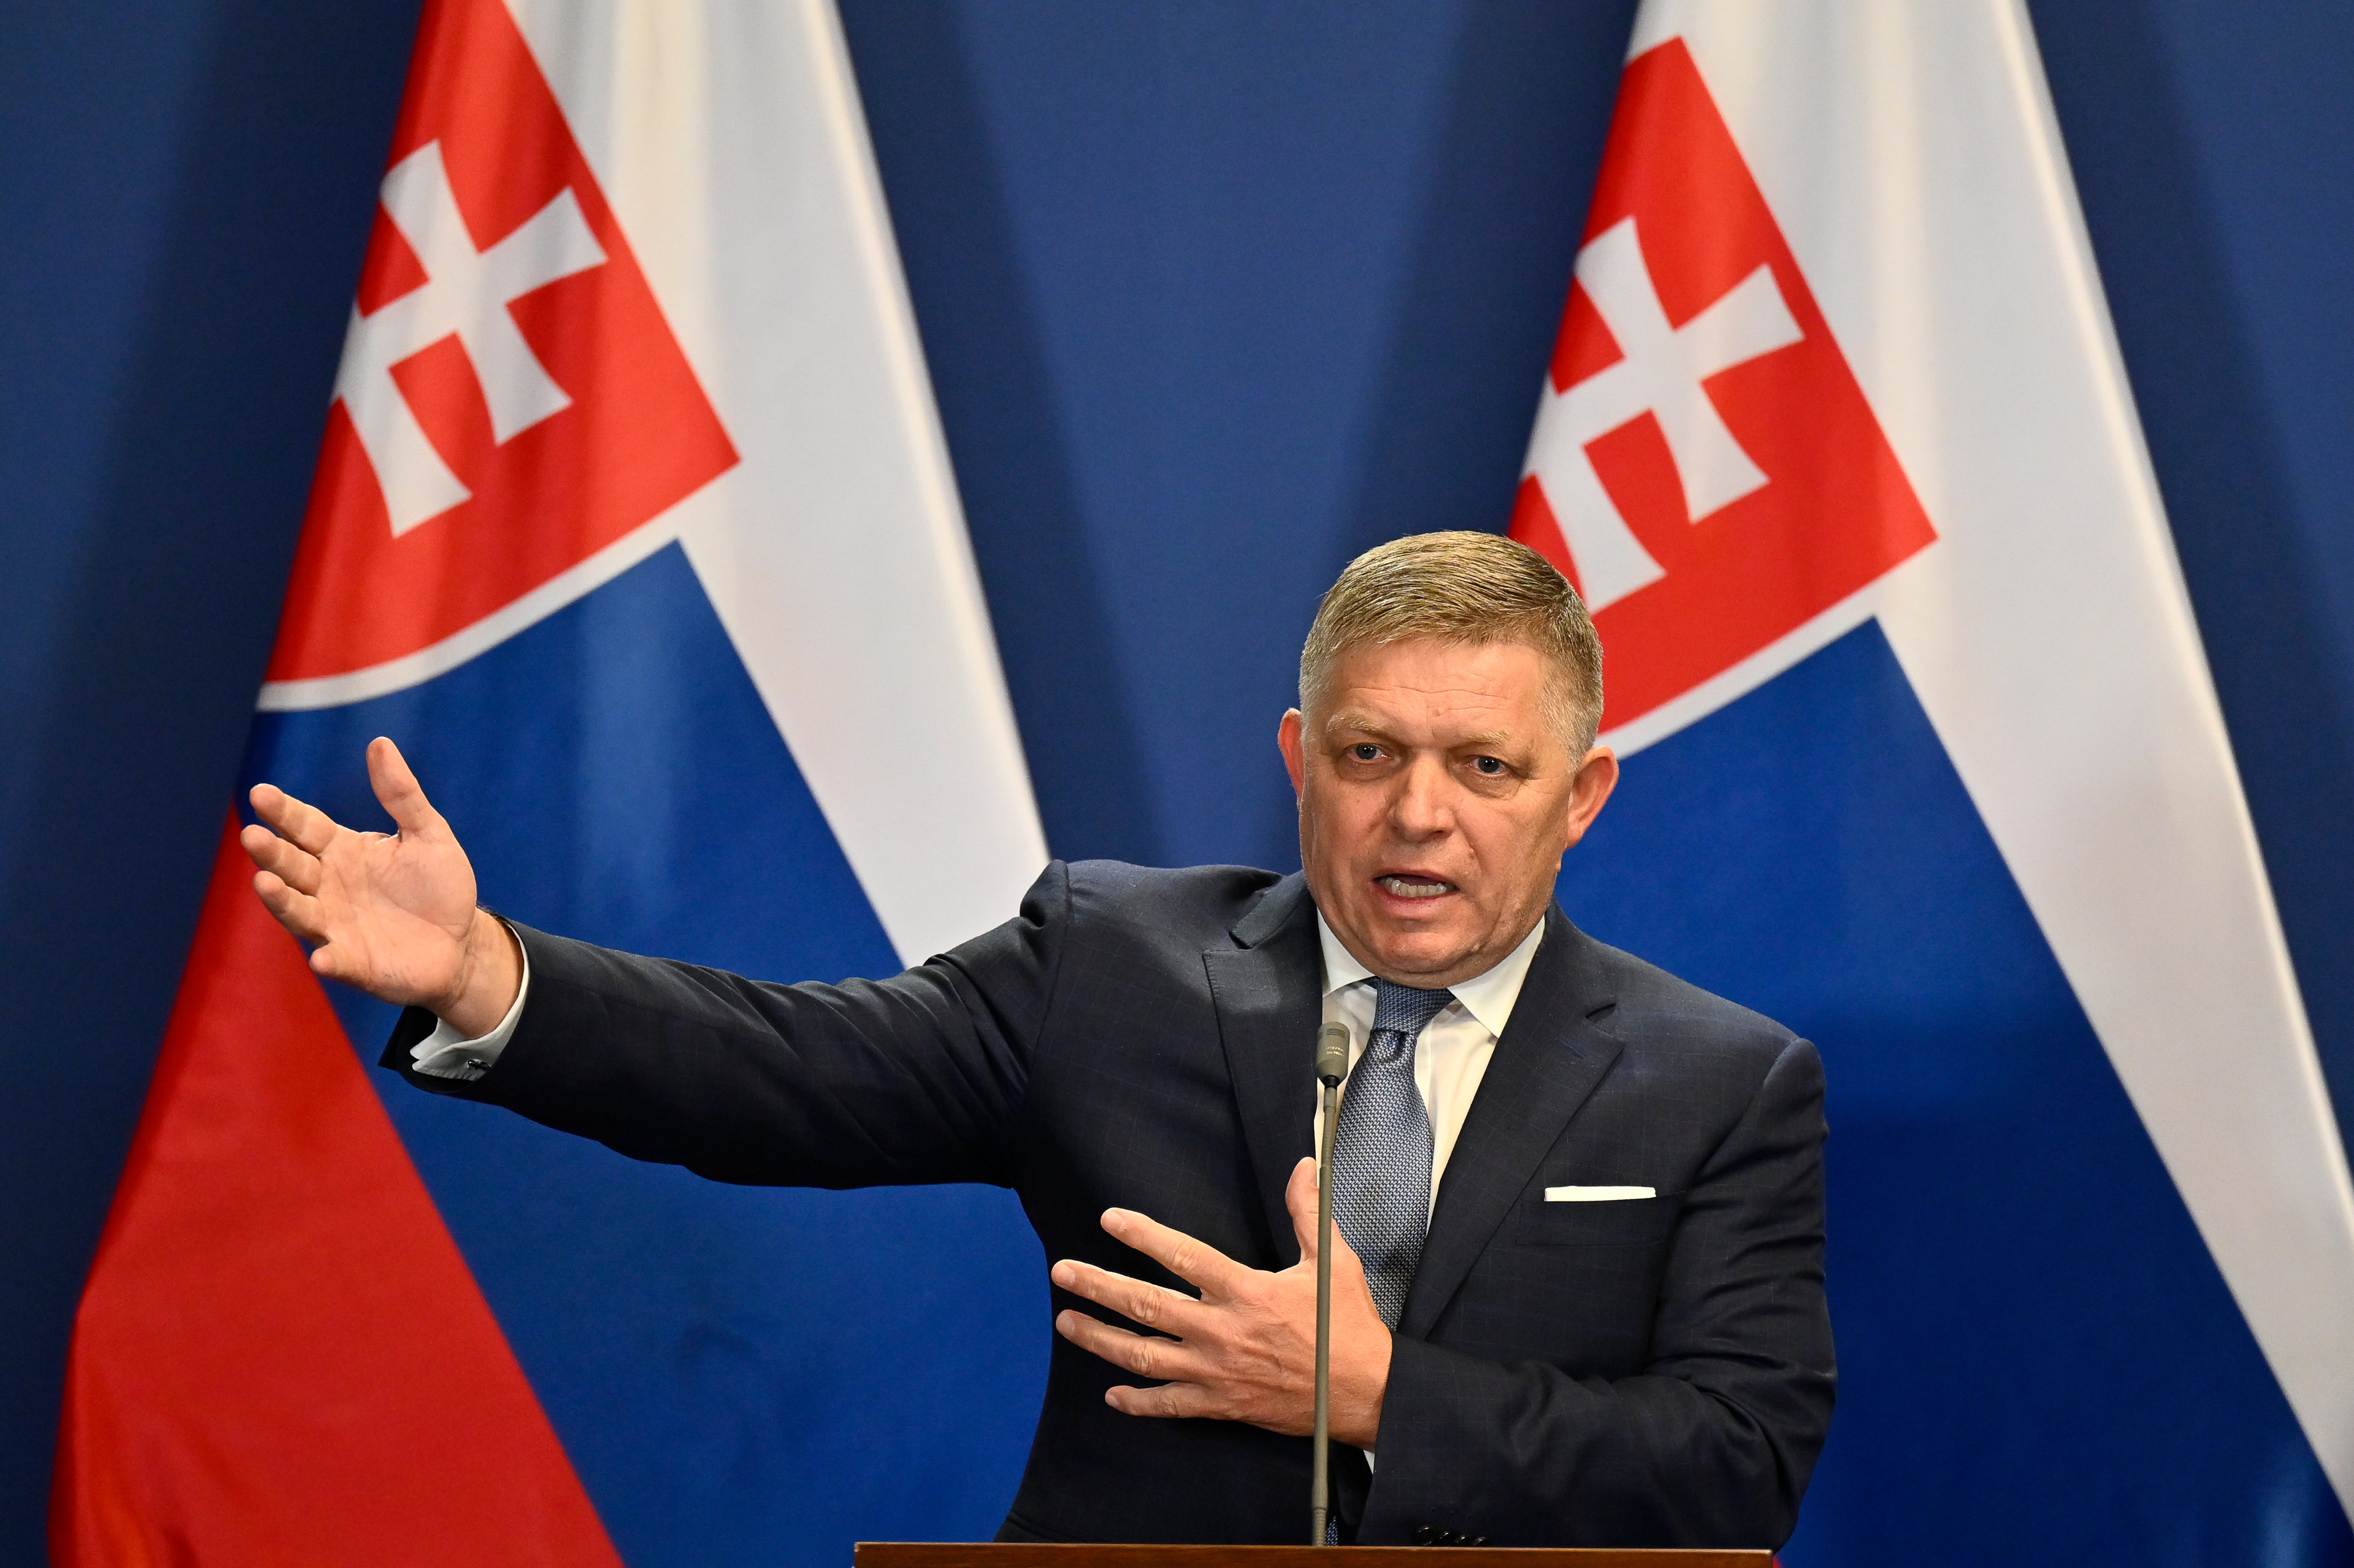 Slovakia’s Prime Minister Robert Fico speaks during a press conference with Hungary’s Prime Minister Viktor Orban